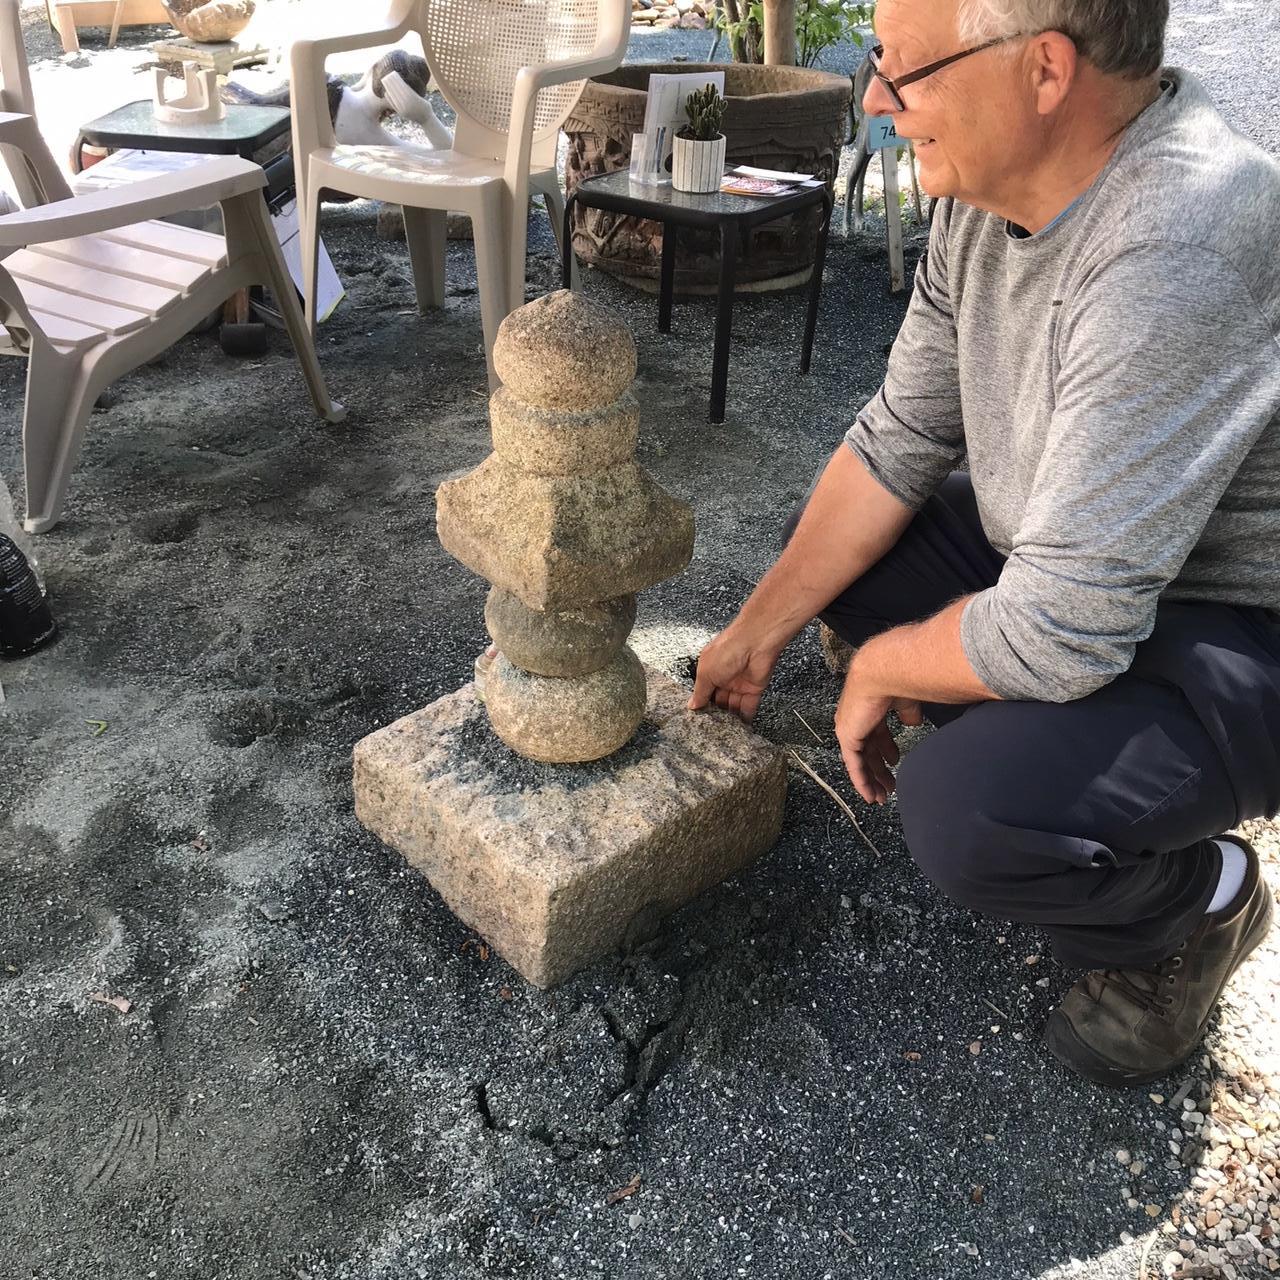 Here's a beautiful and unique way to accent your indoor or outdoor garden space with this rare very old architectural stone treasure from Japan.

Japan, a fine tall old sculptural pagoda representing Buddhism's five elements: Earth, water, wind,